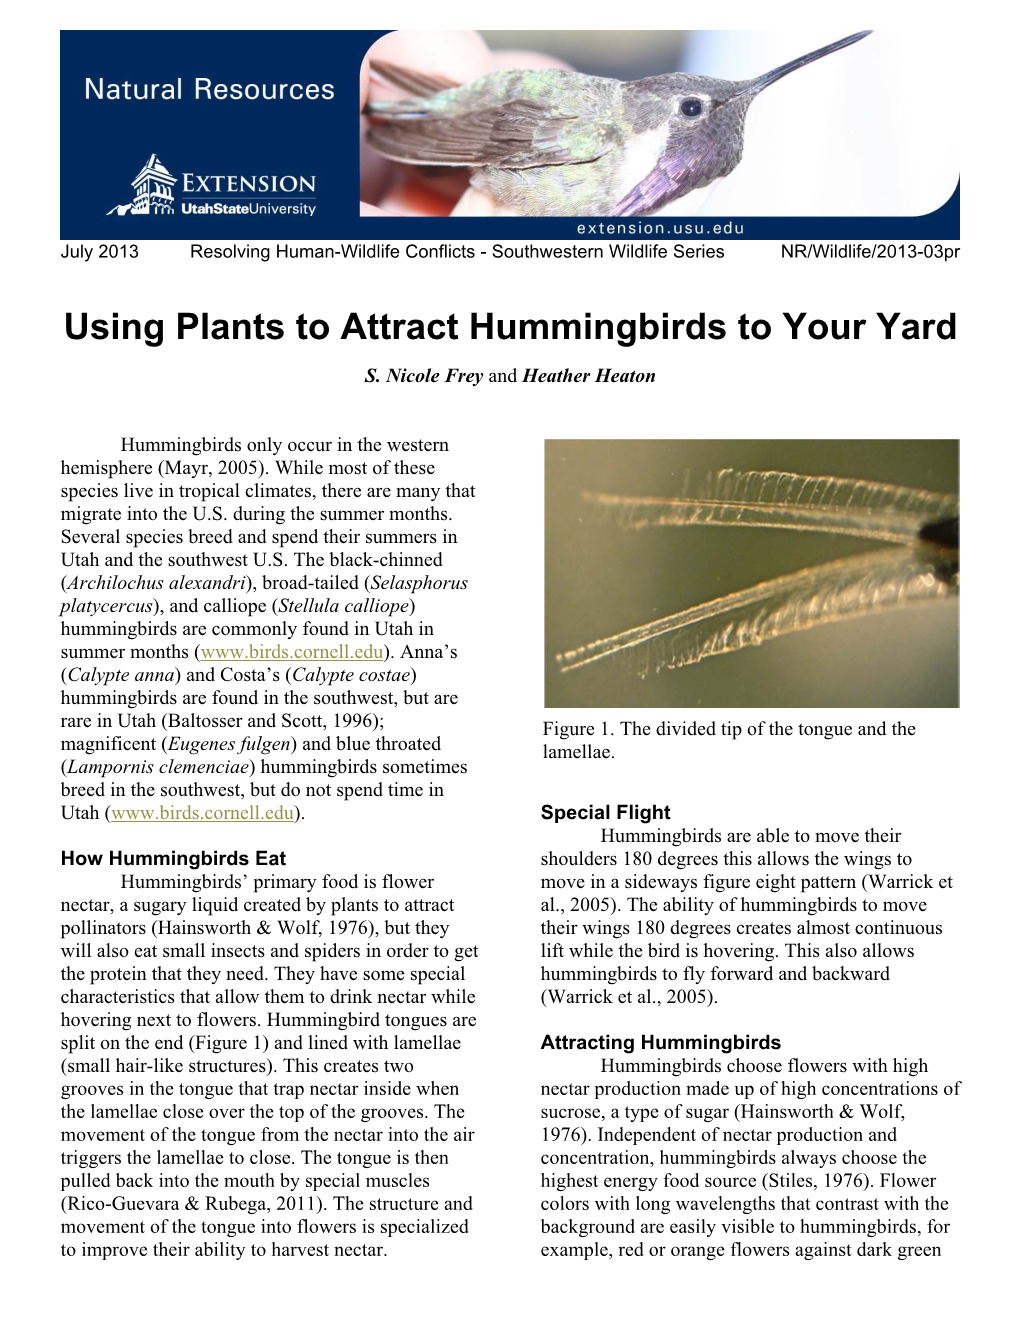 Using Plants to Attract Hummingbirds to Your Yard S